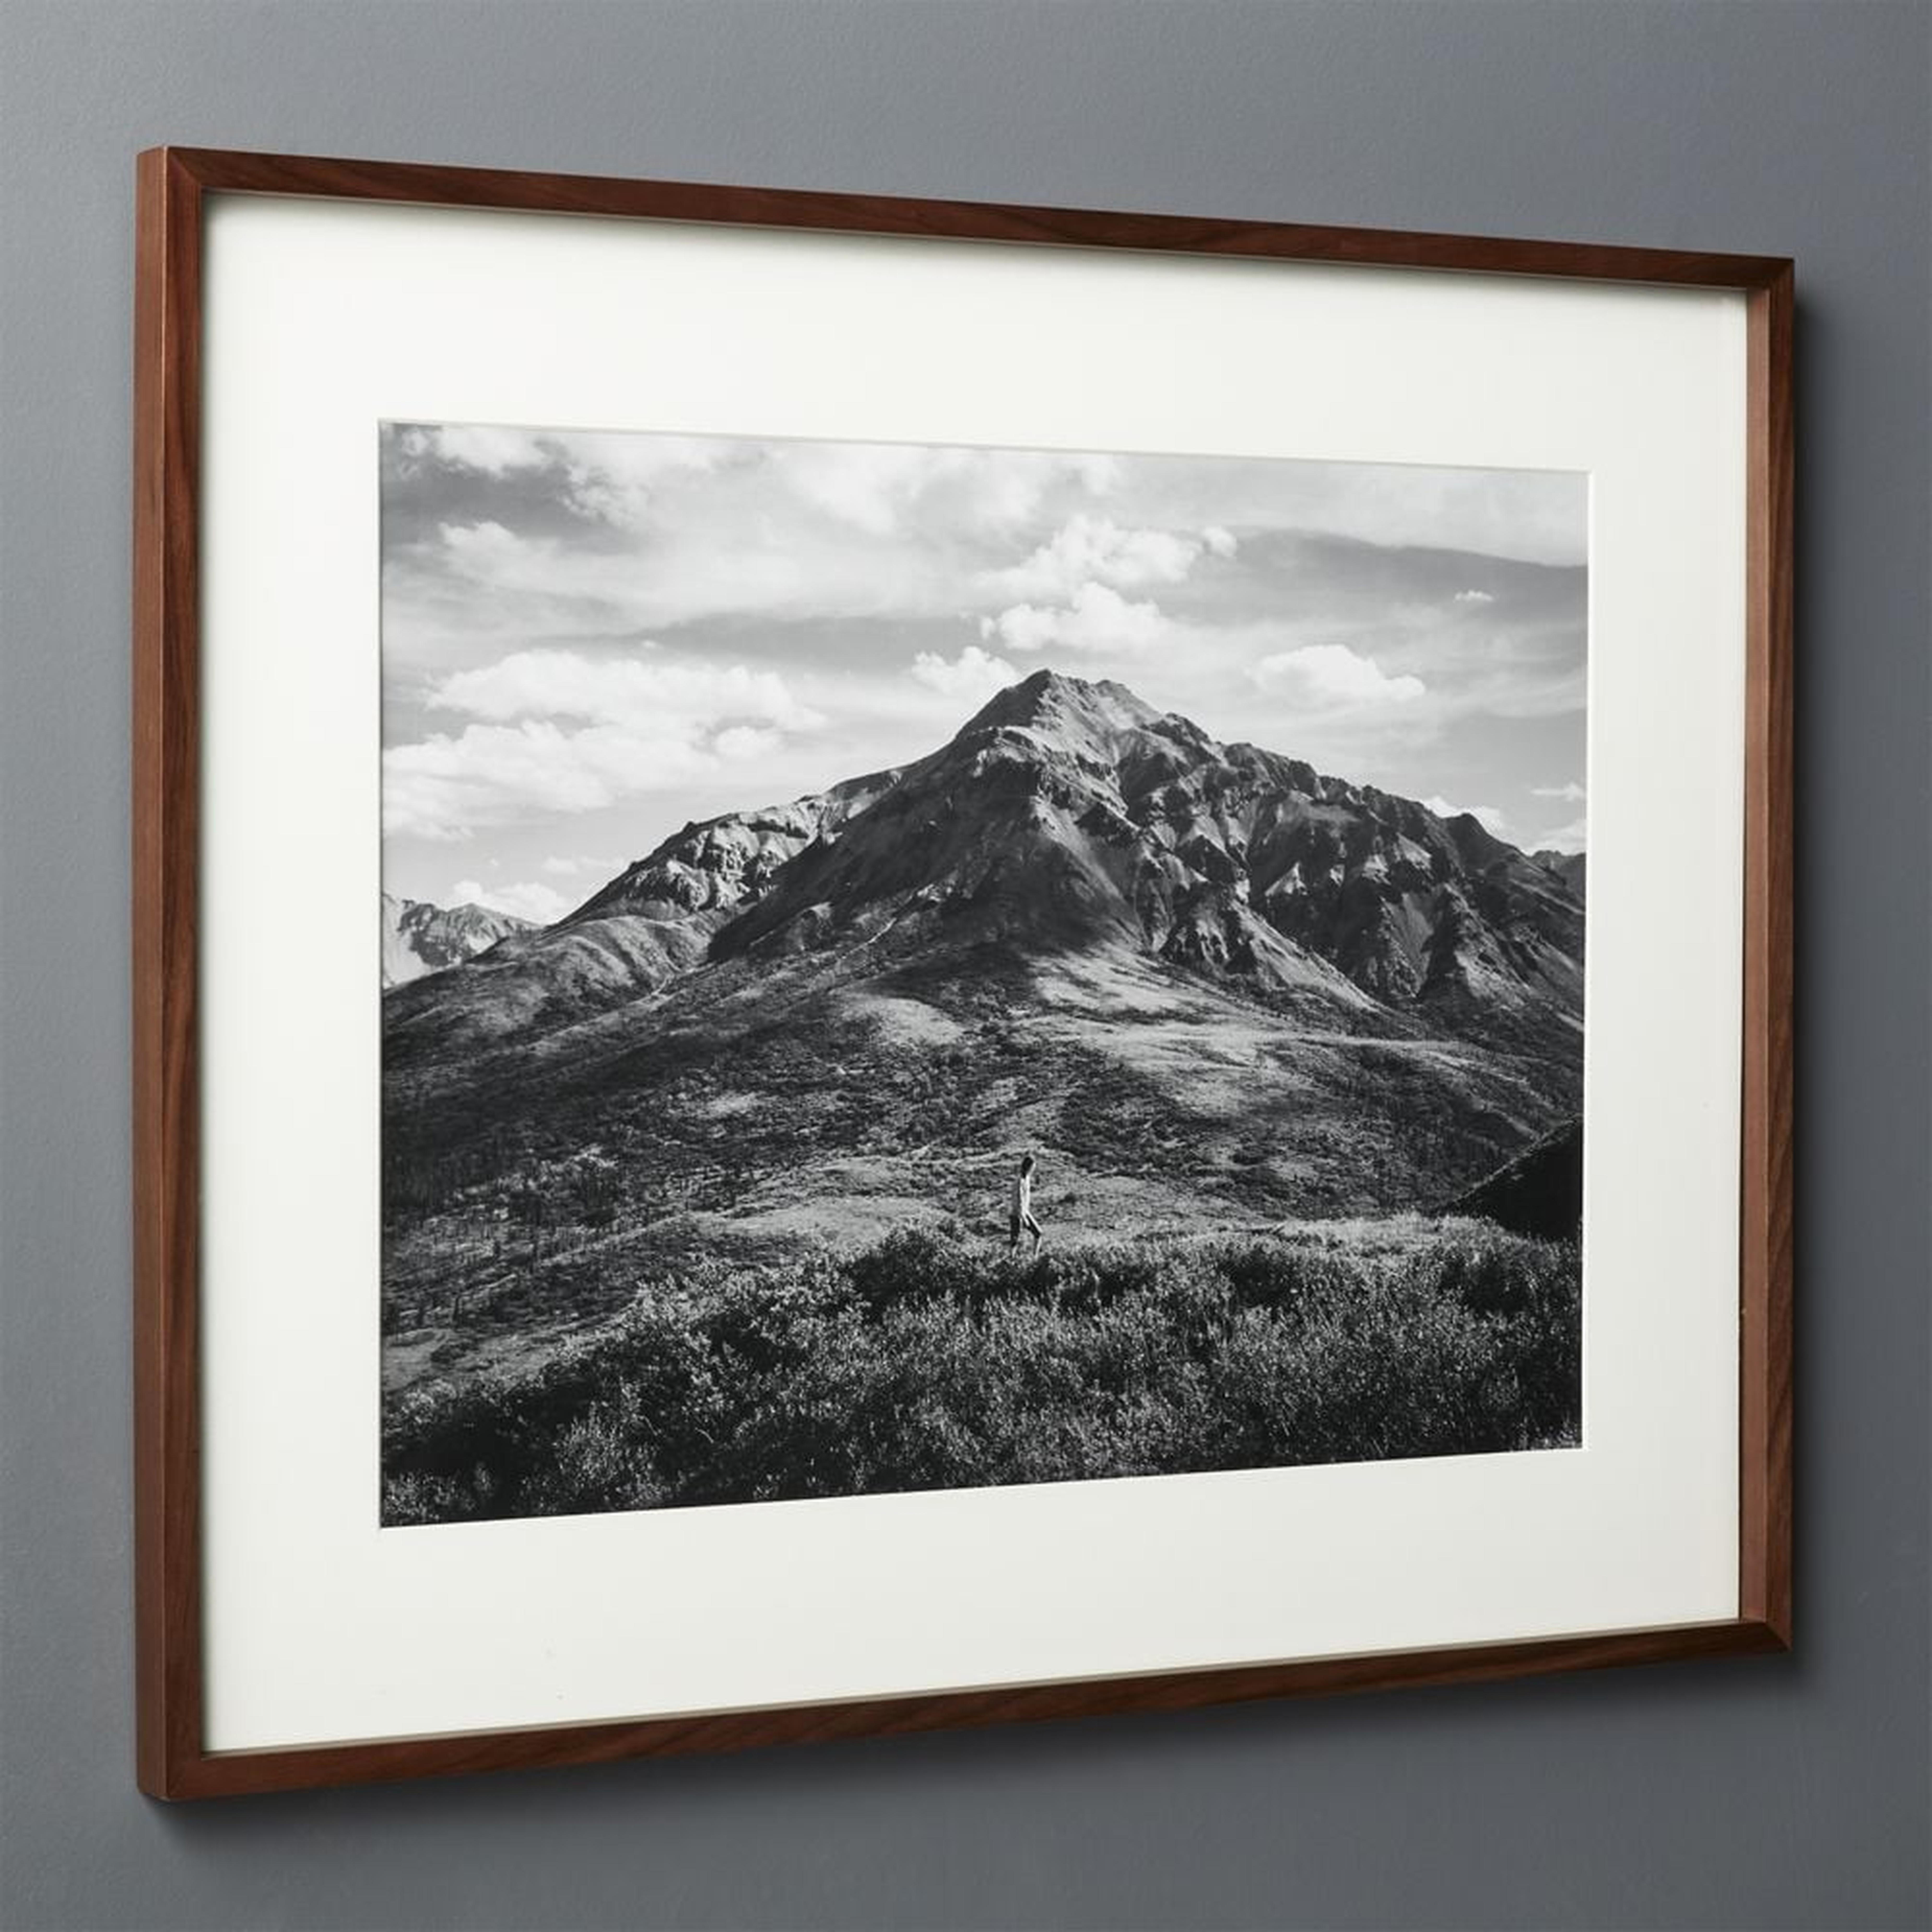 Gallery Walnut Frame with White Mat 18x24 - CB2